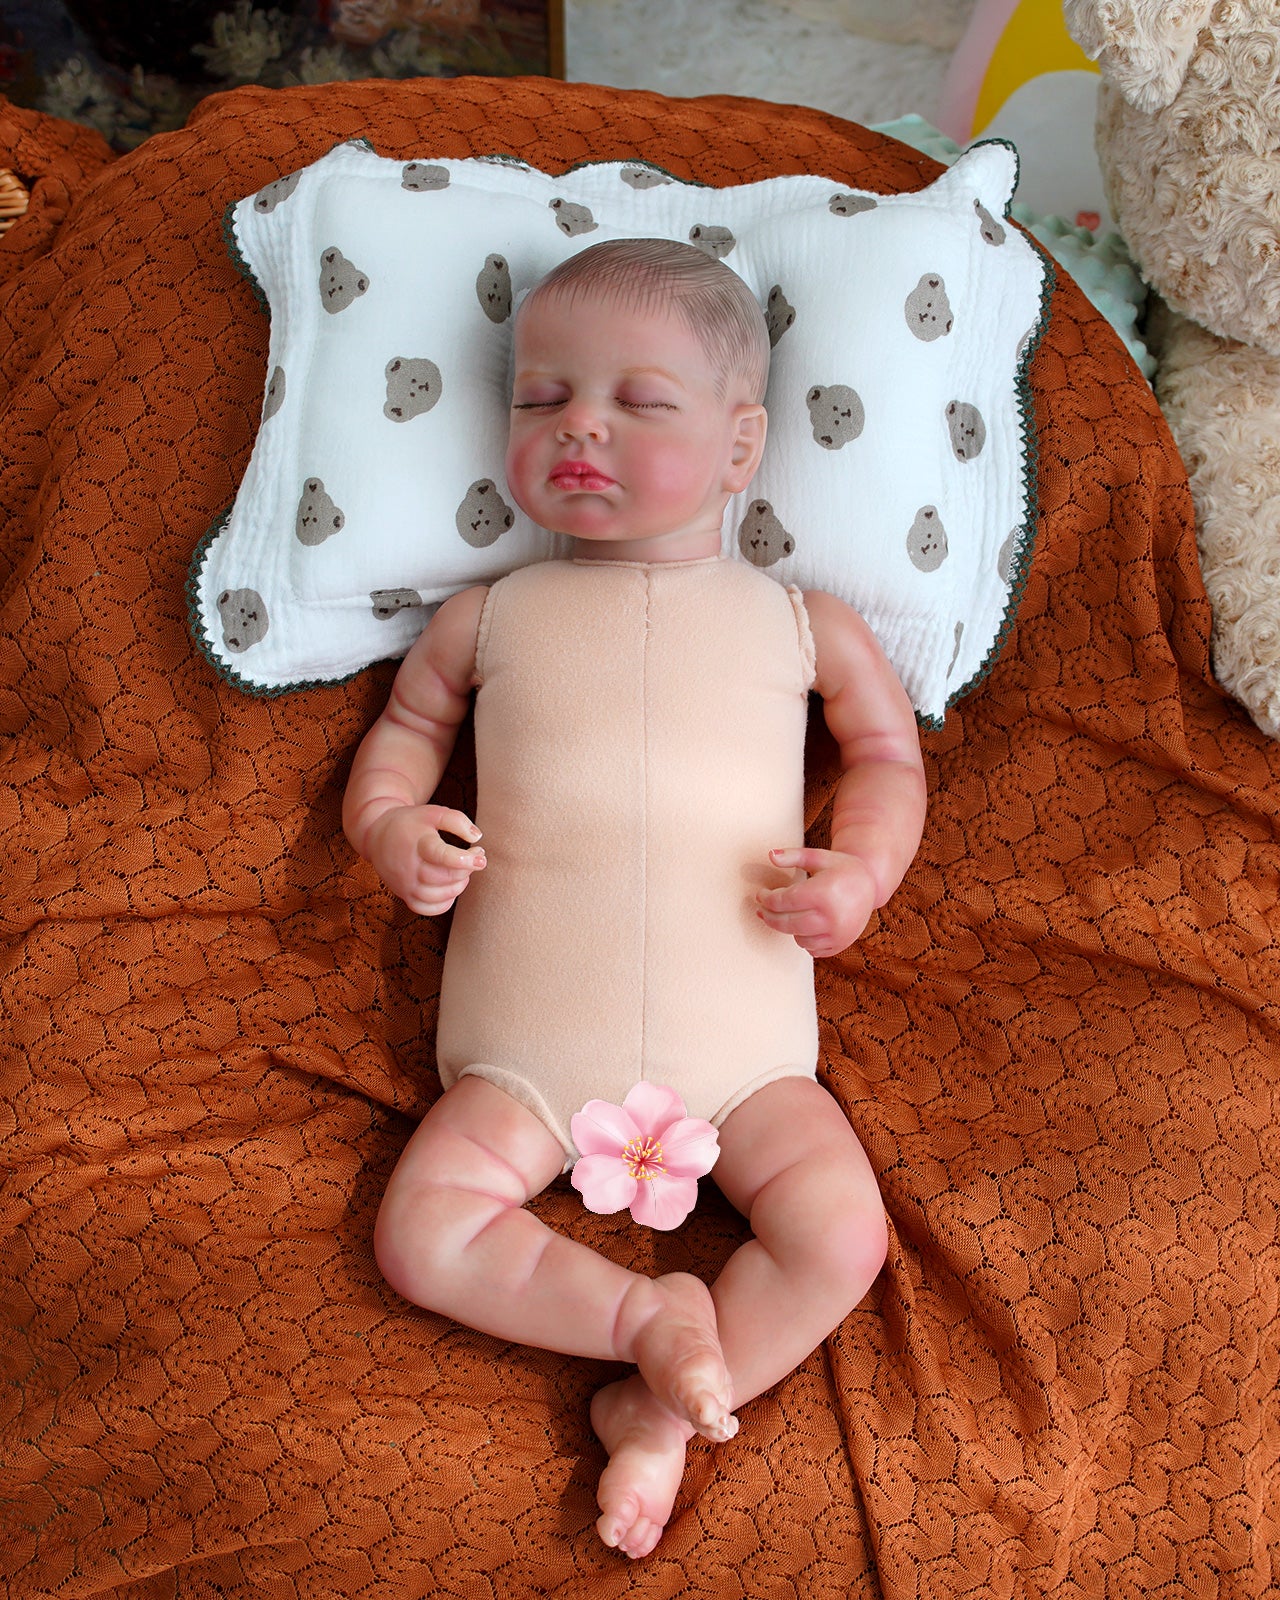 Gertie - 20" Reborn Baby Dolls Weighted Cloth Body Toddlers Girl With Soft Vinyl Silicone Limbs